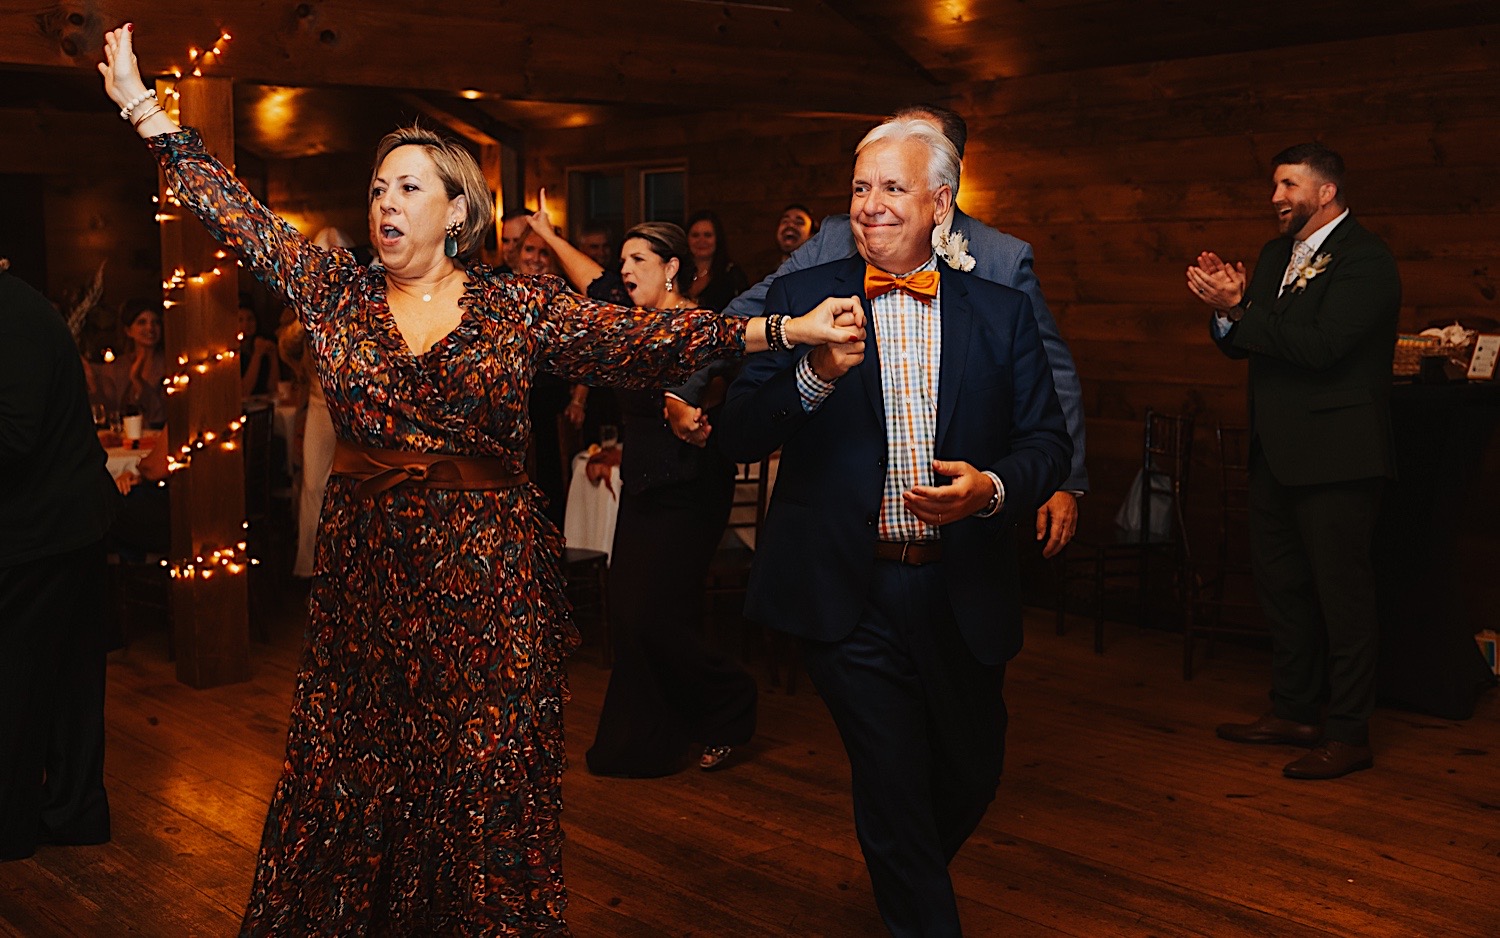 Guests of an indoor wedding reception at Lake Bomoseen Lodge in Vermont hold hands as they enter the dance floor together